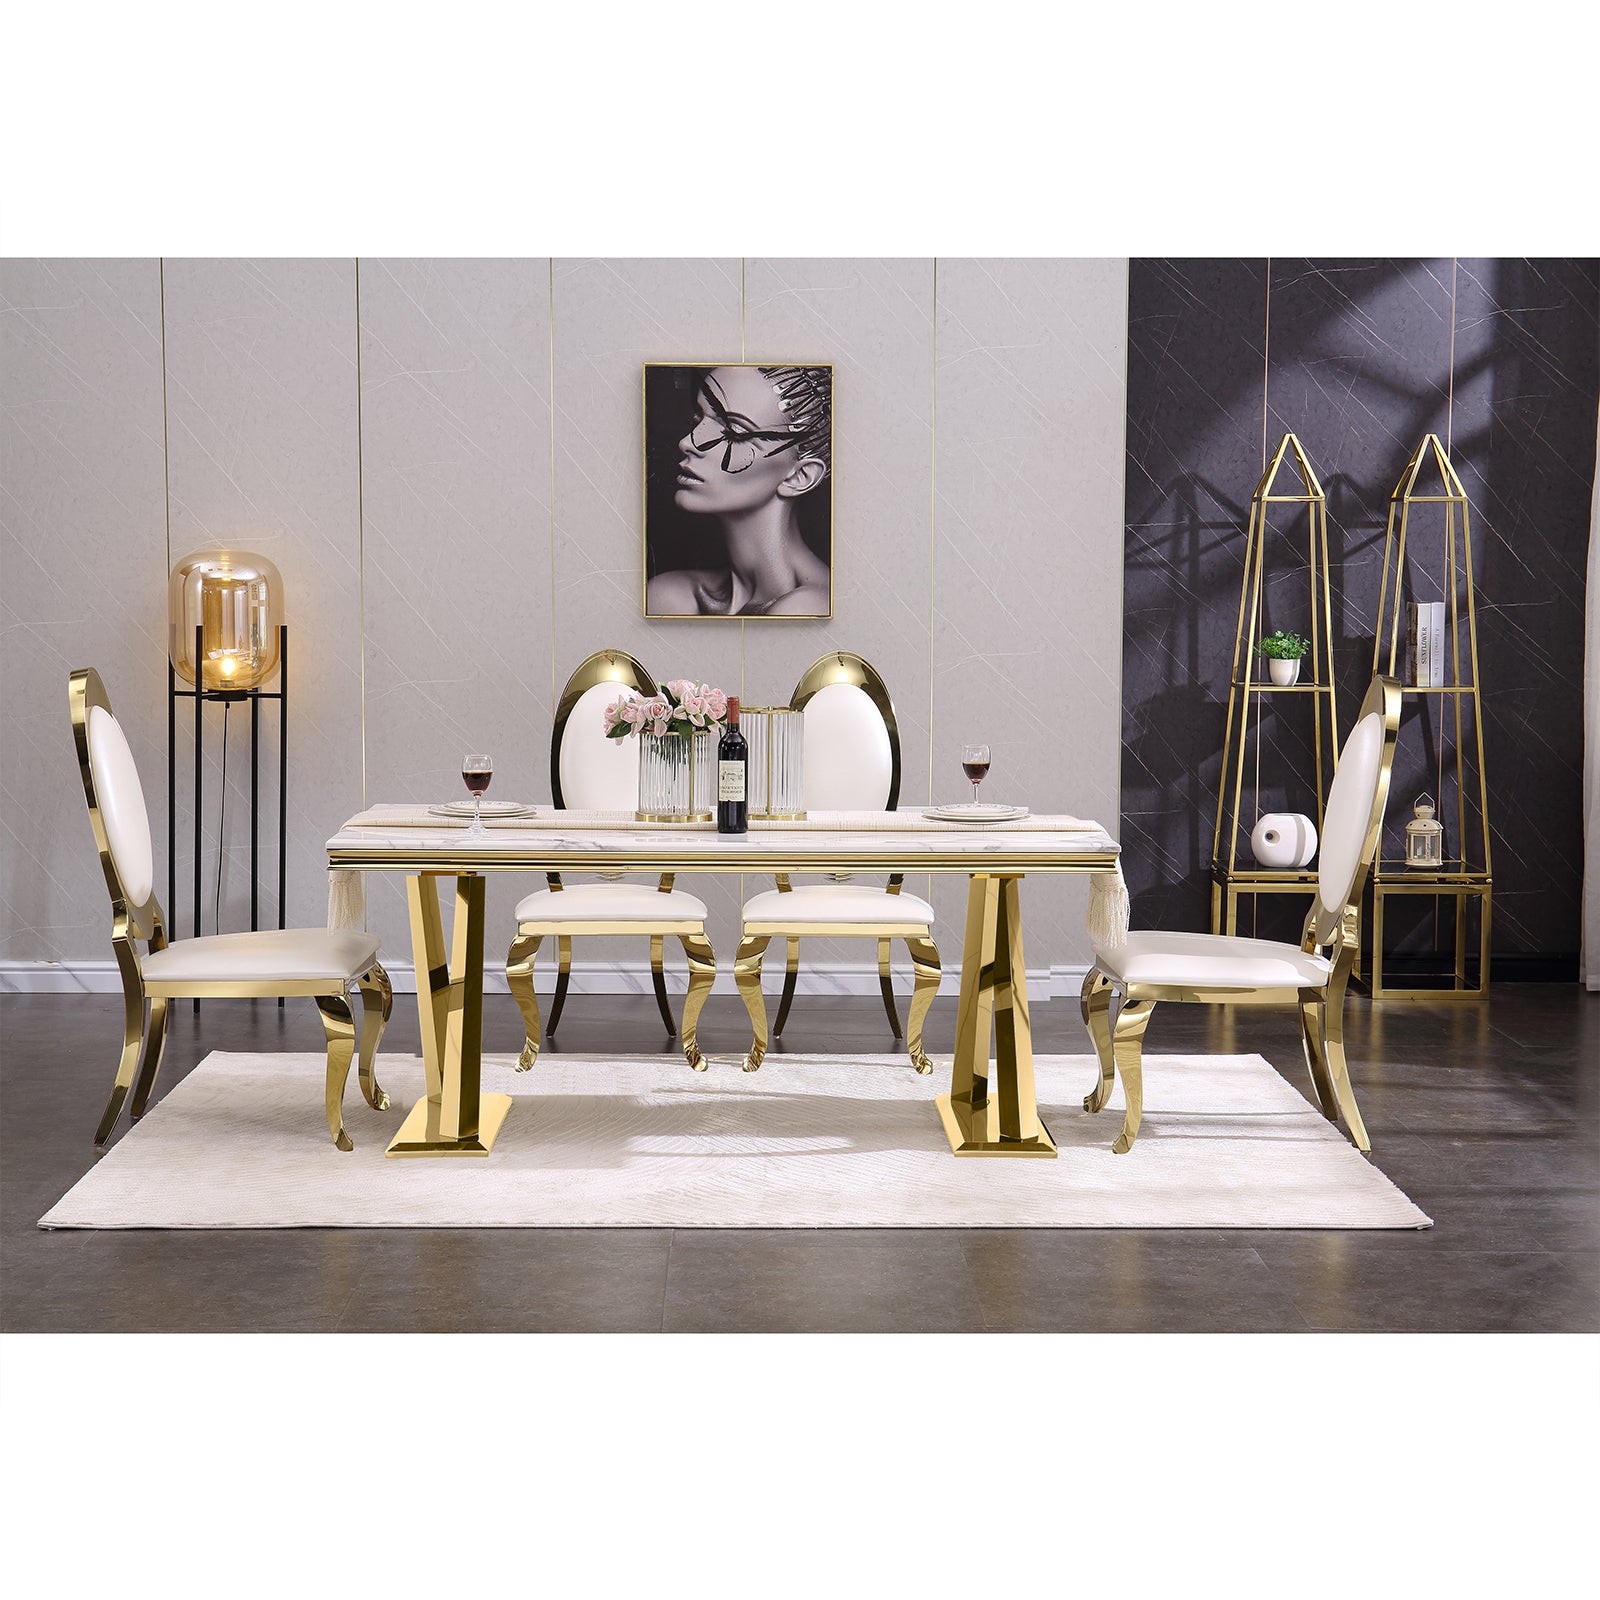 653-Set | AUZ White and Gold Dining room Sets for 6